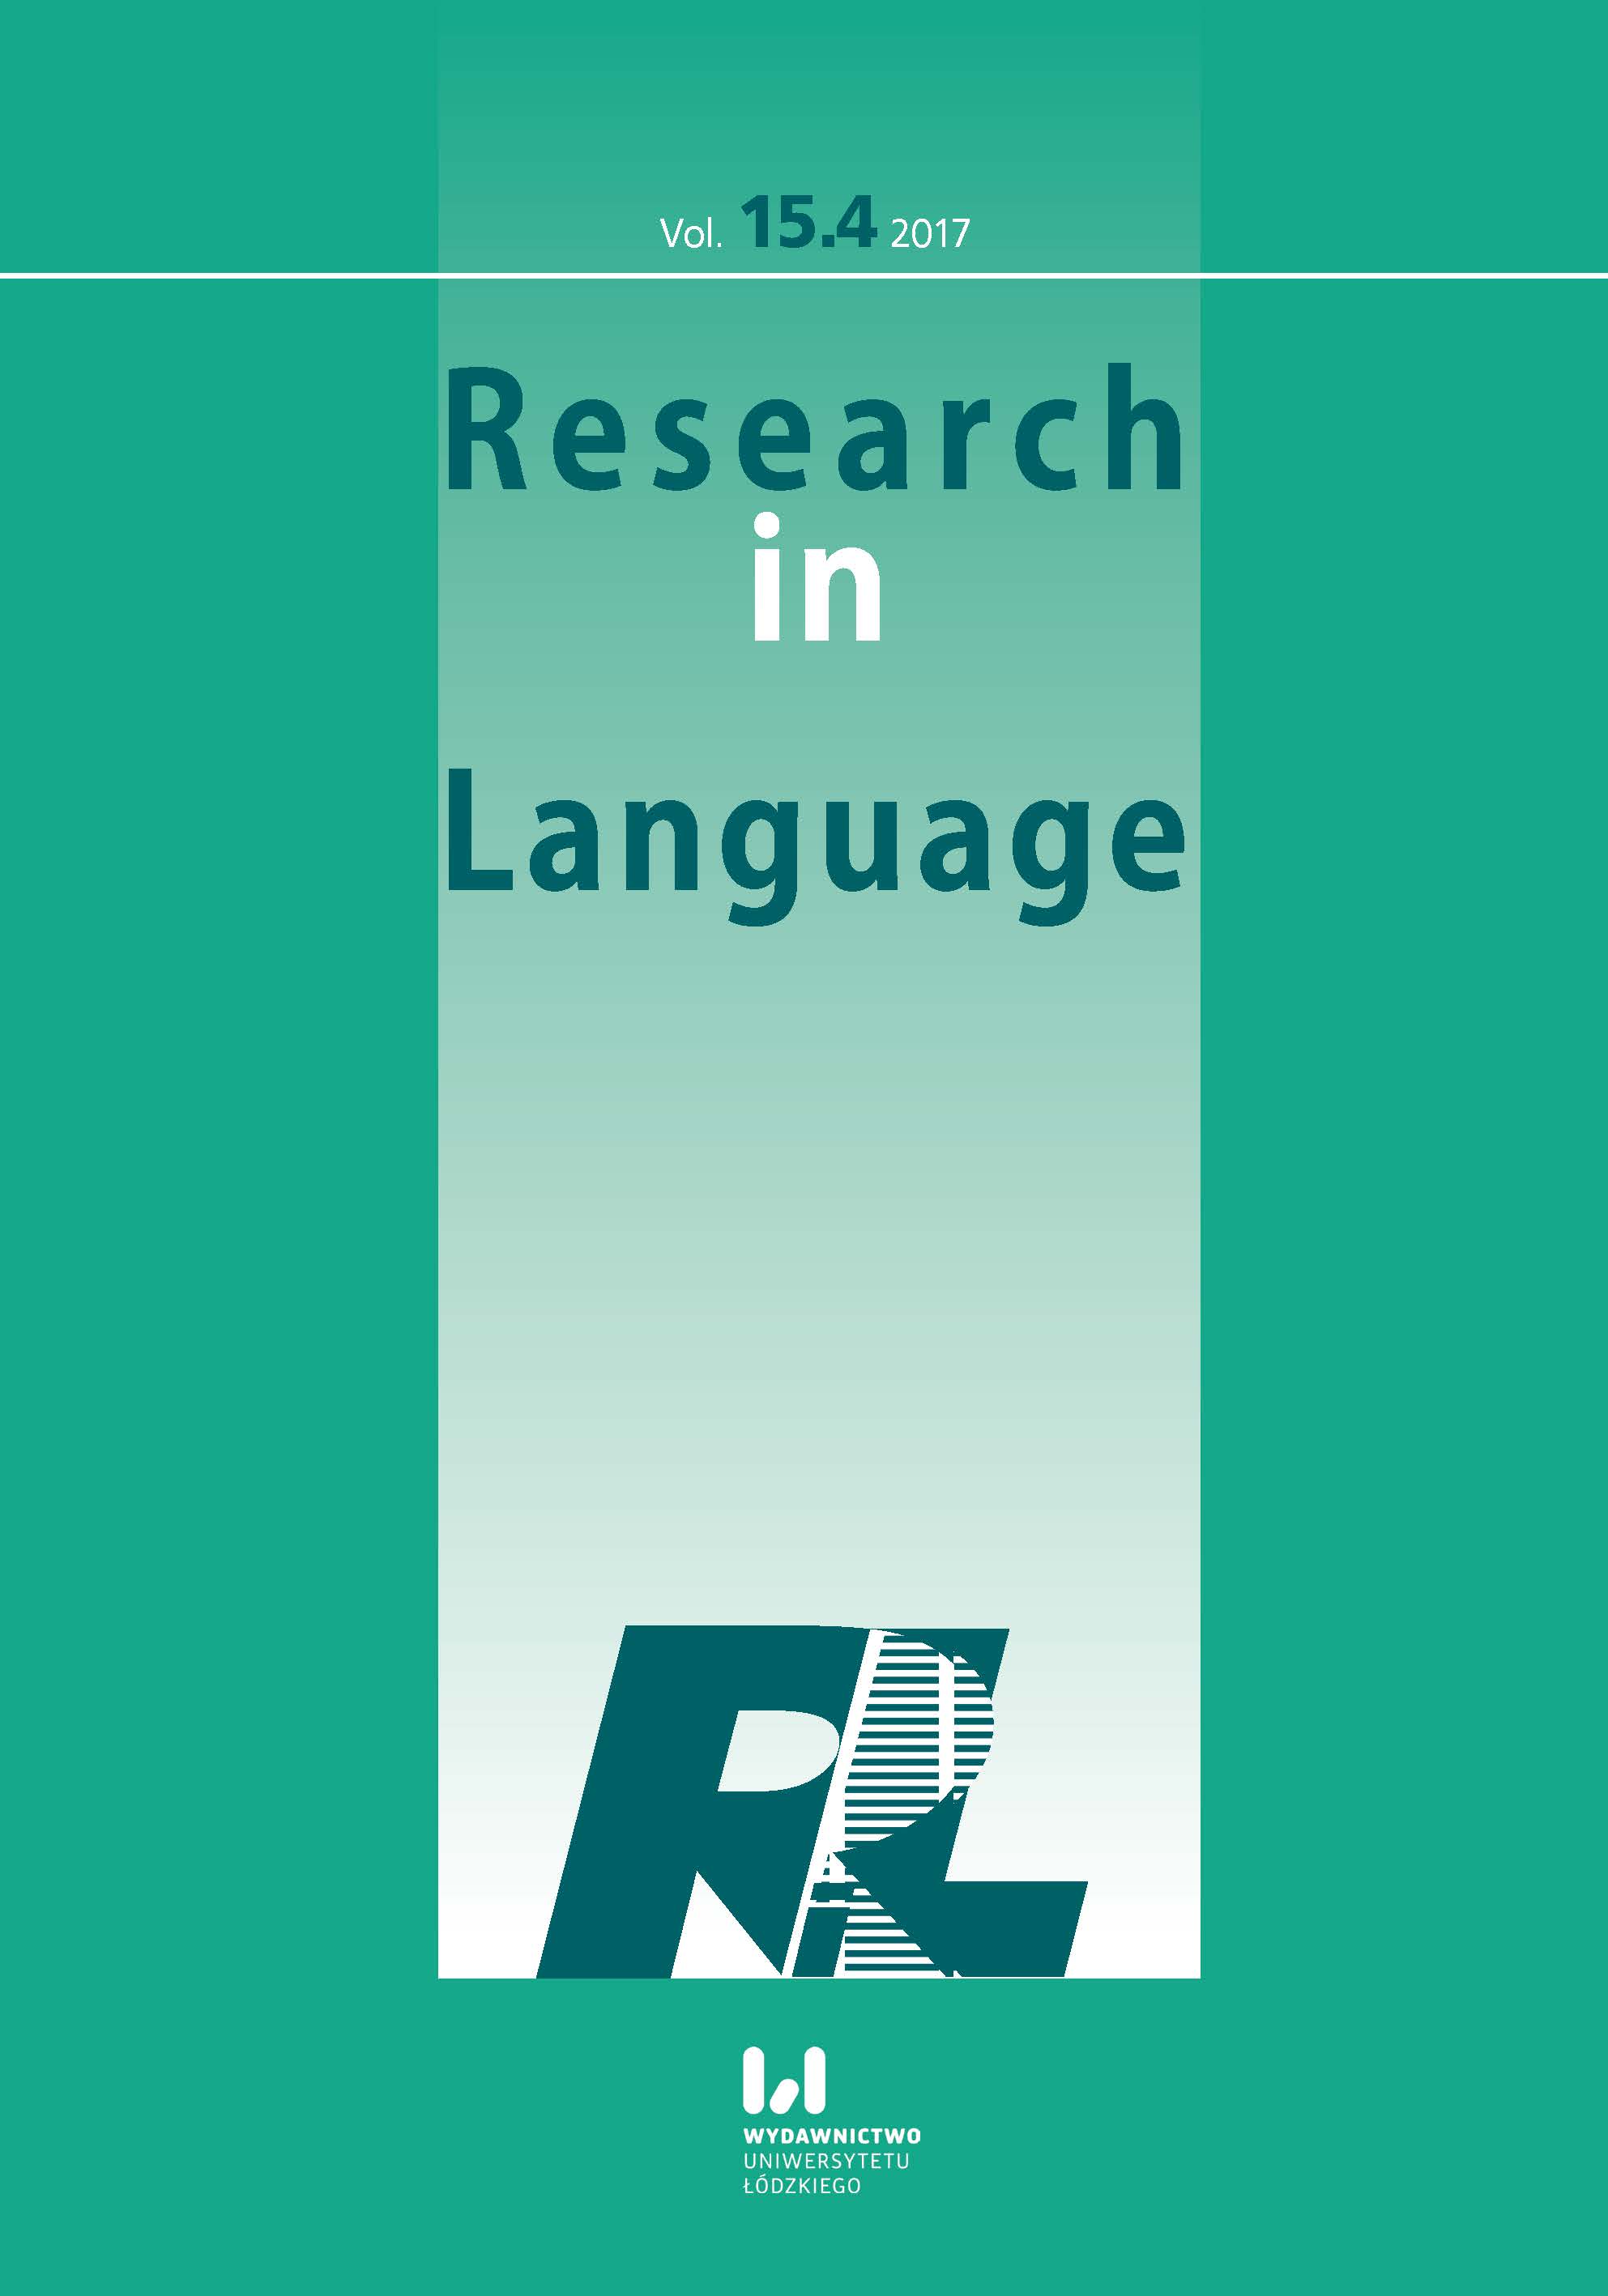 The Effect of Incidental Learning on the Comprehension of English Affixes by Arabic-Speaking EFL Learners: Acquisition and Application